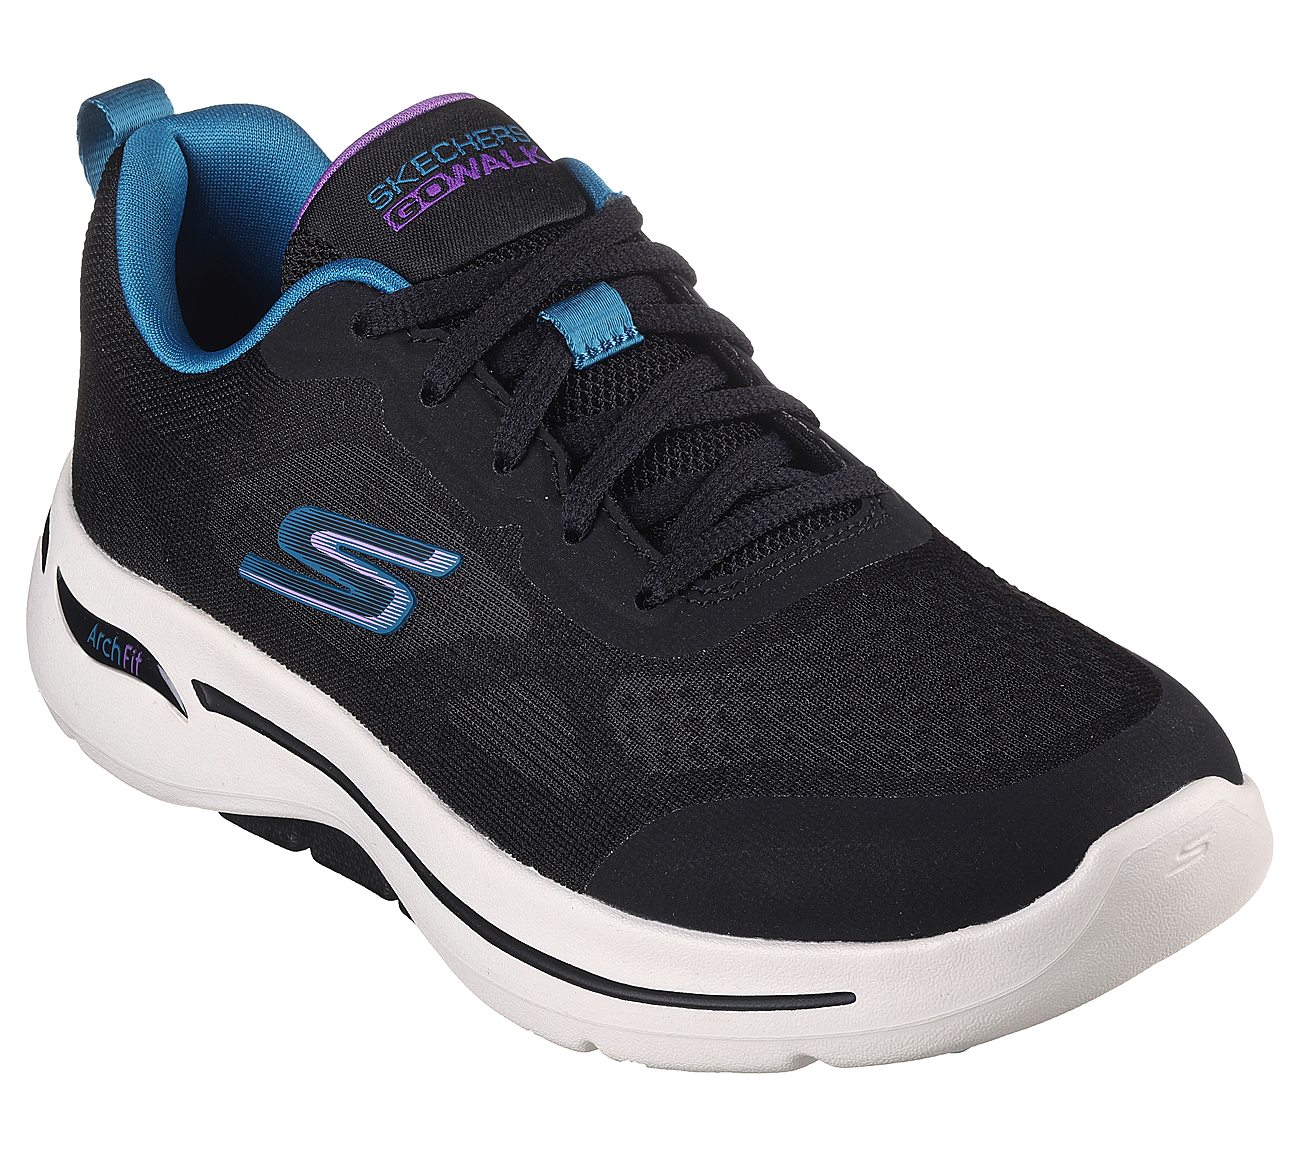 Skechers Black/Lavender Go Walk Arch Fit F Womens Lace Up Shoes - Style ...